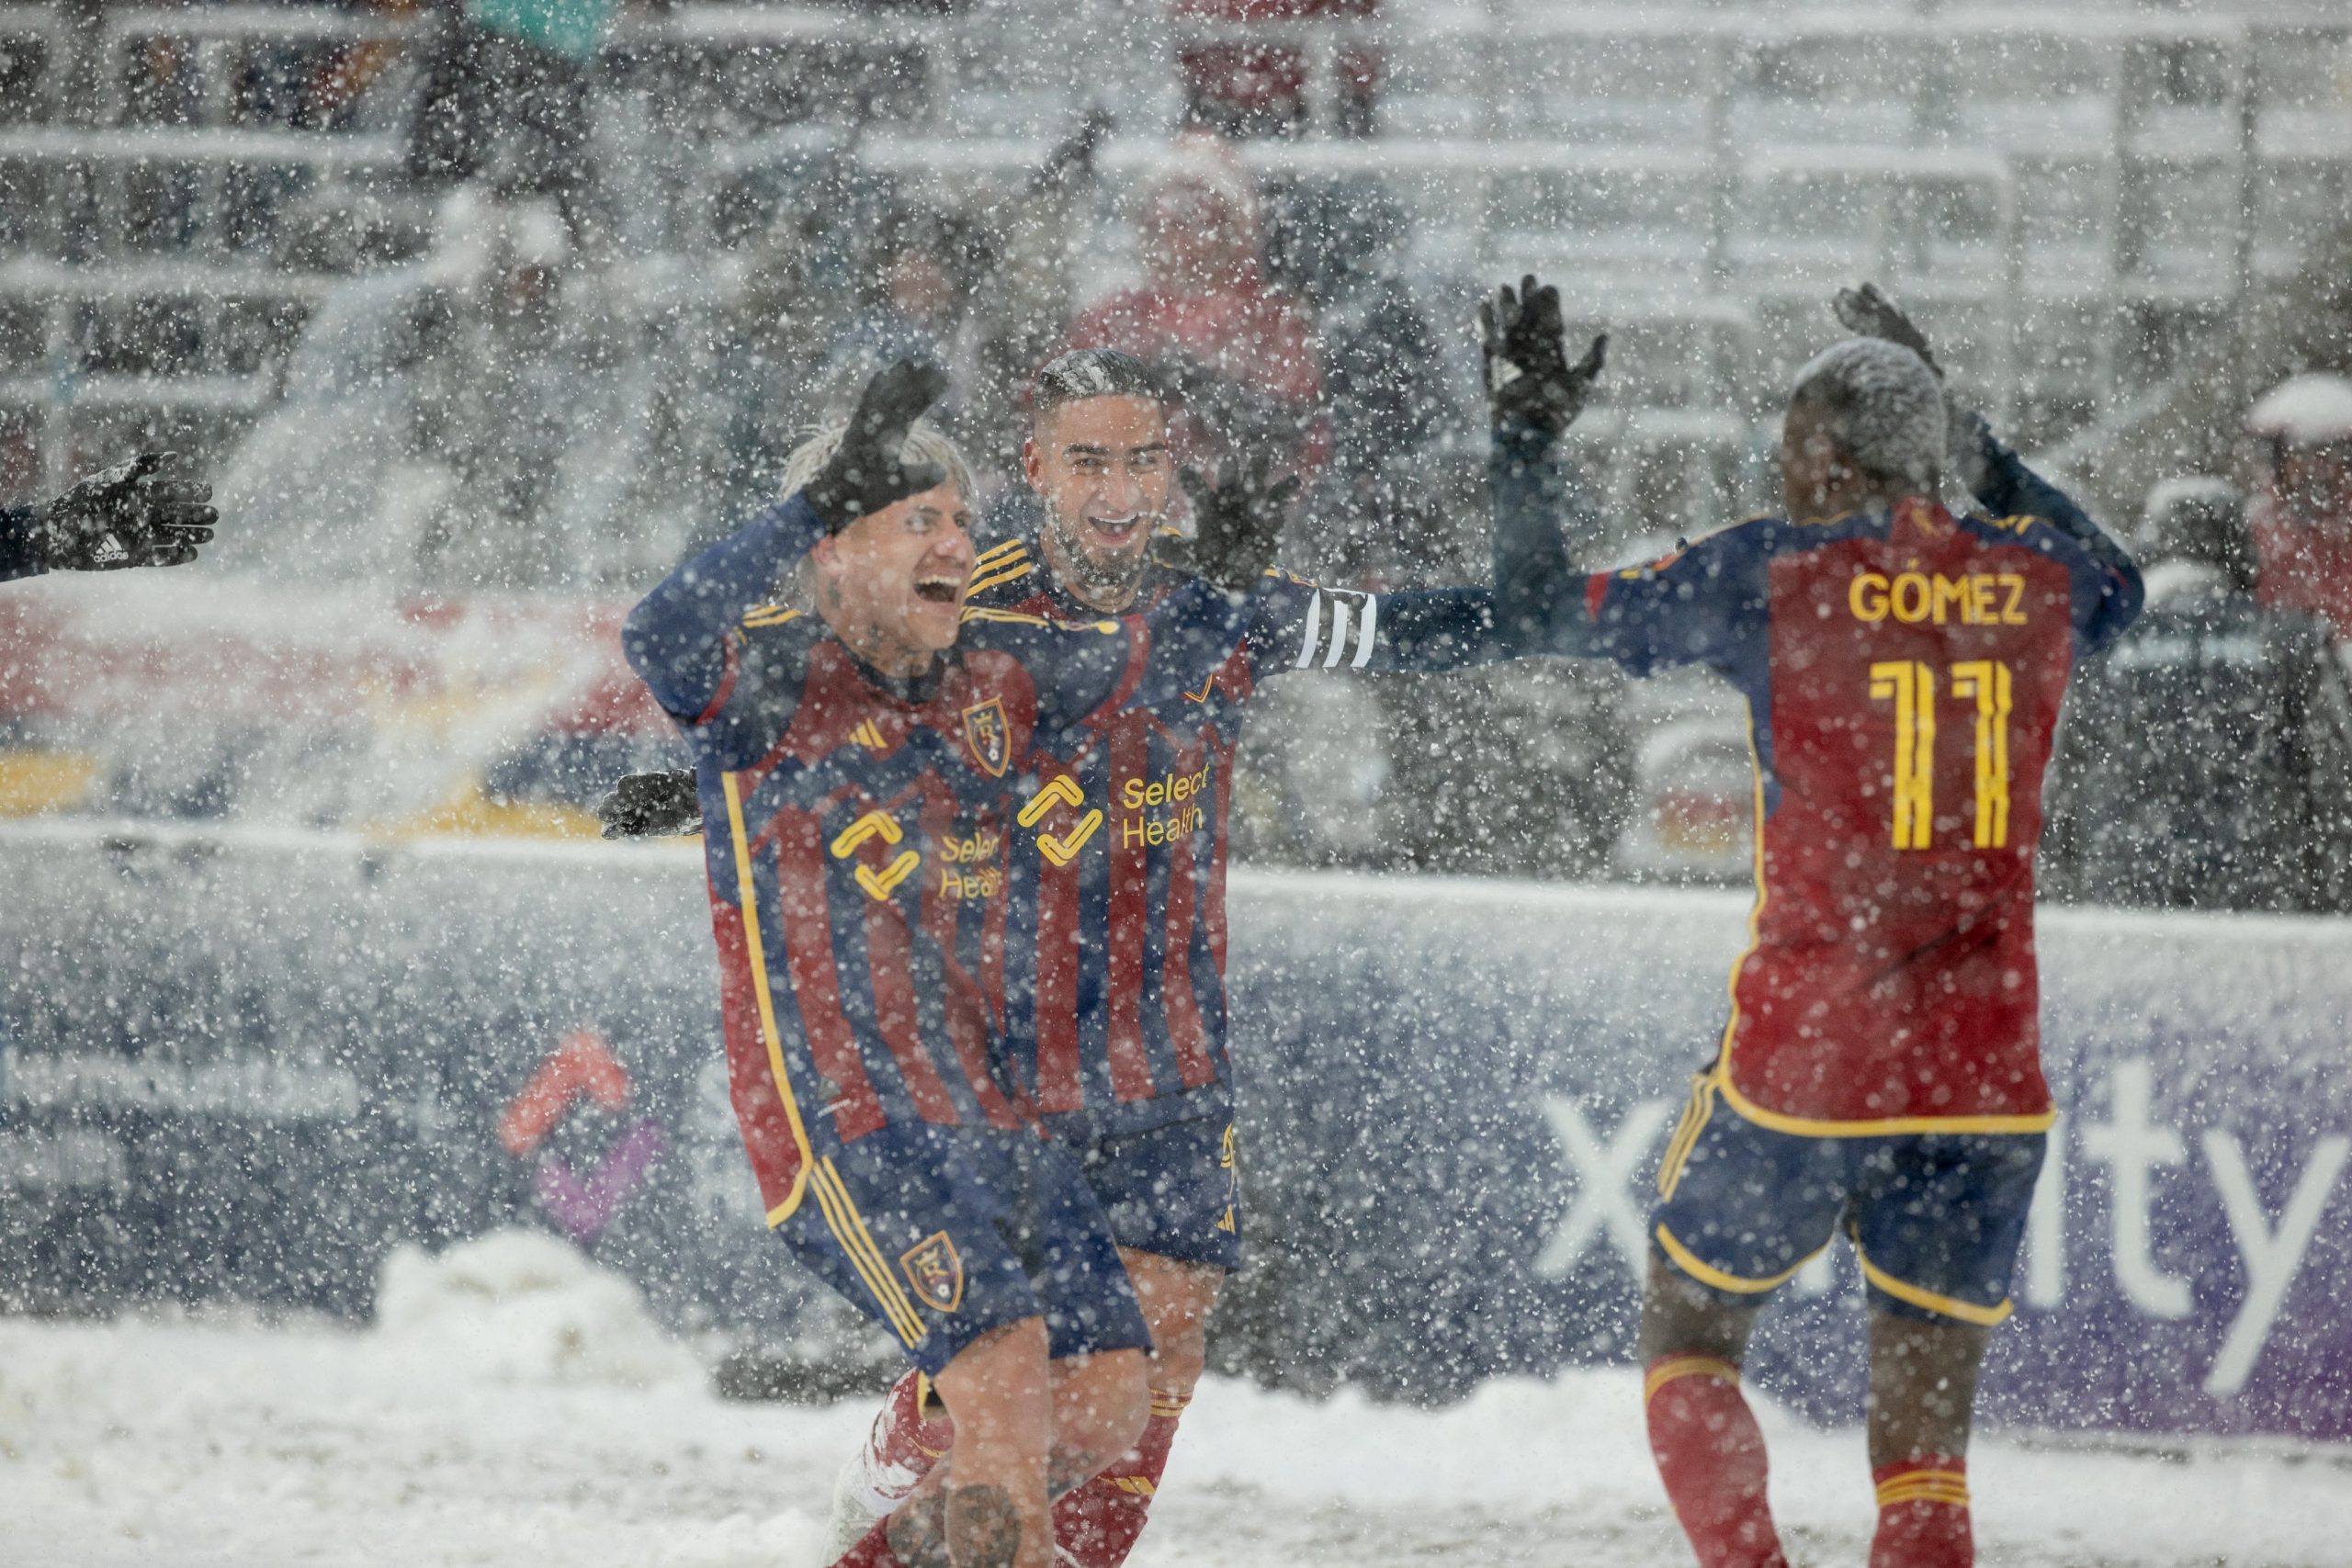 RSL was victorious in the snow. (Courtesy Real Salt Lake)